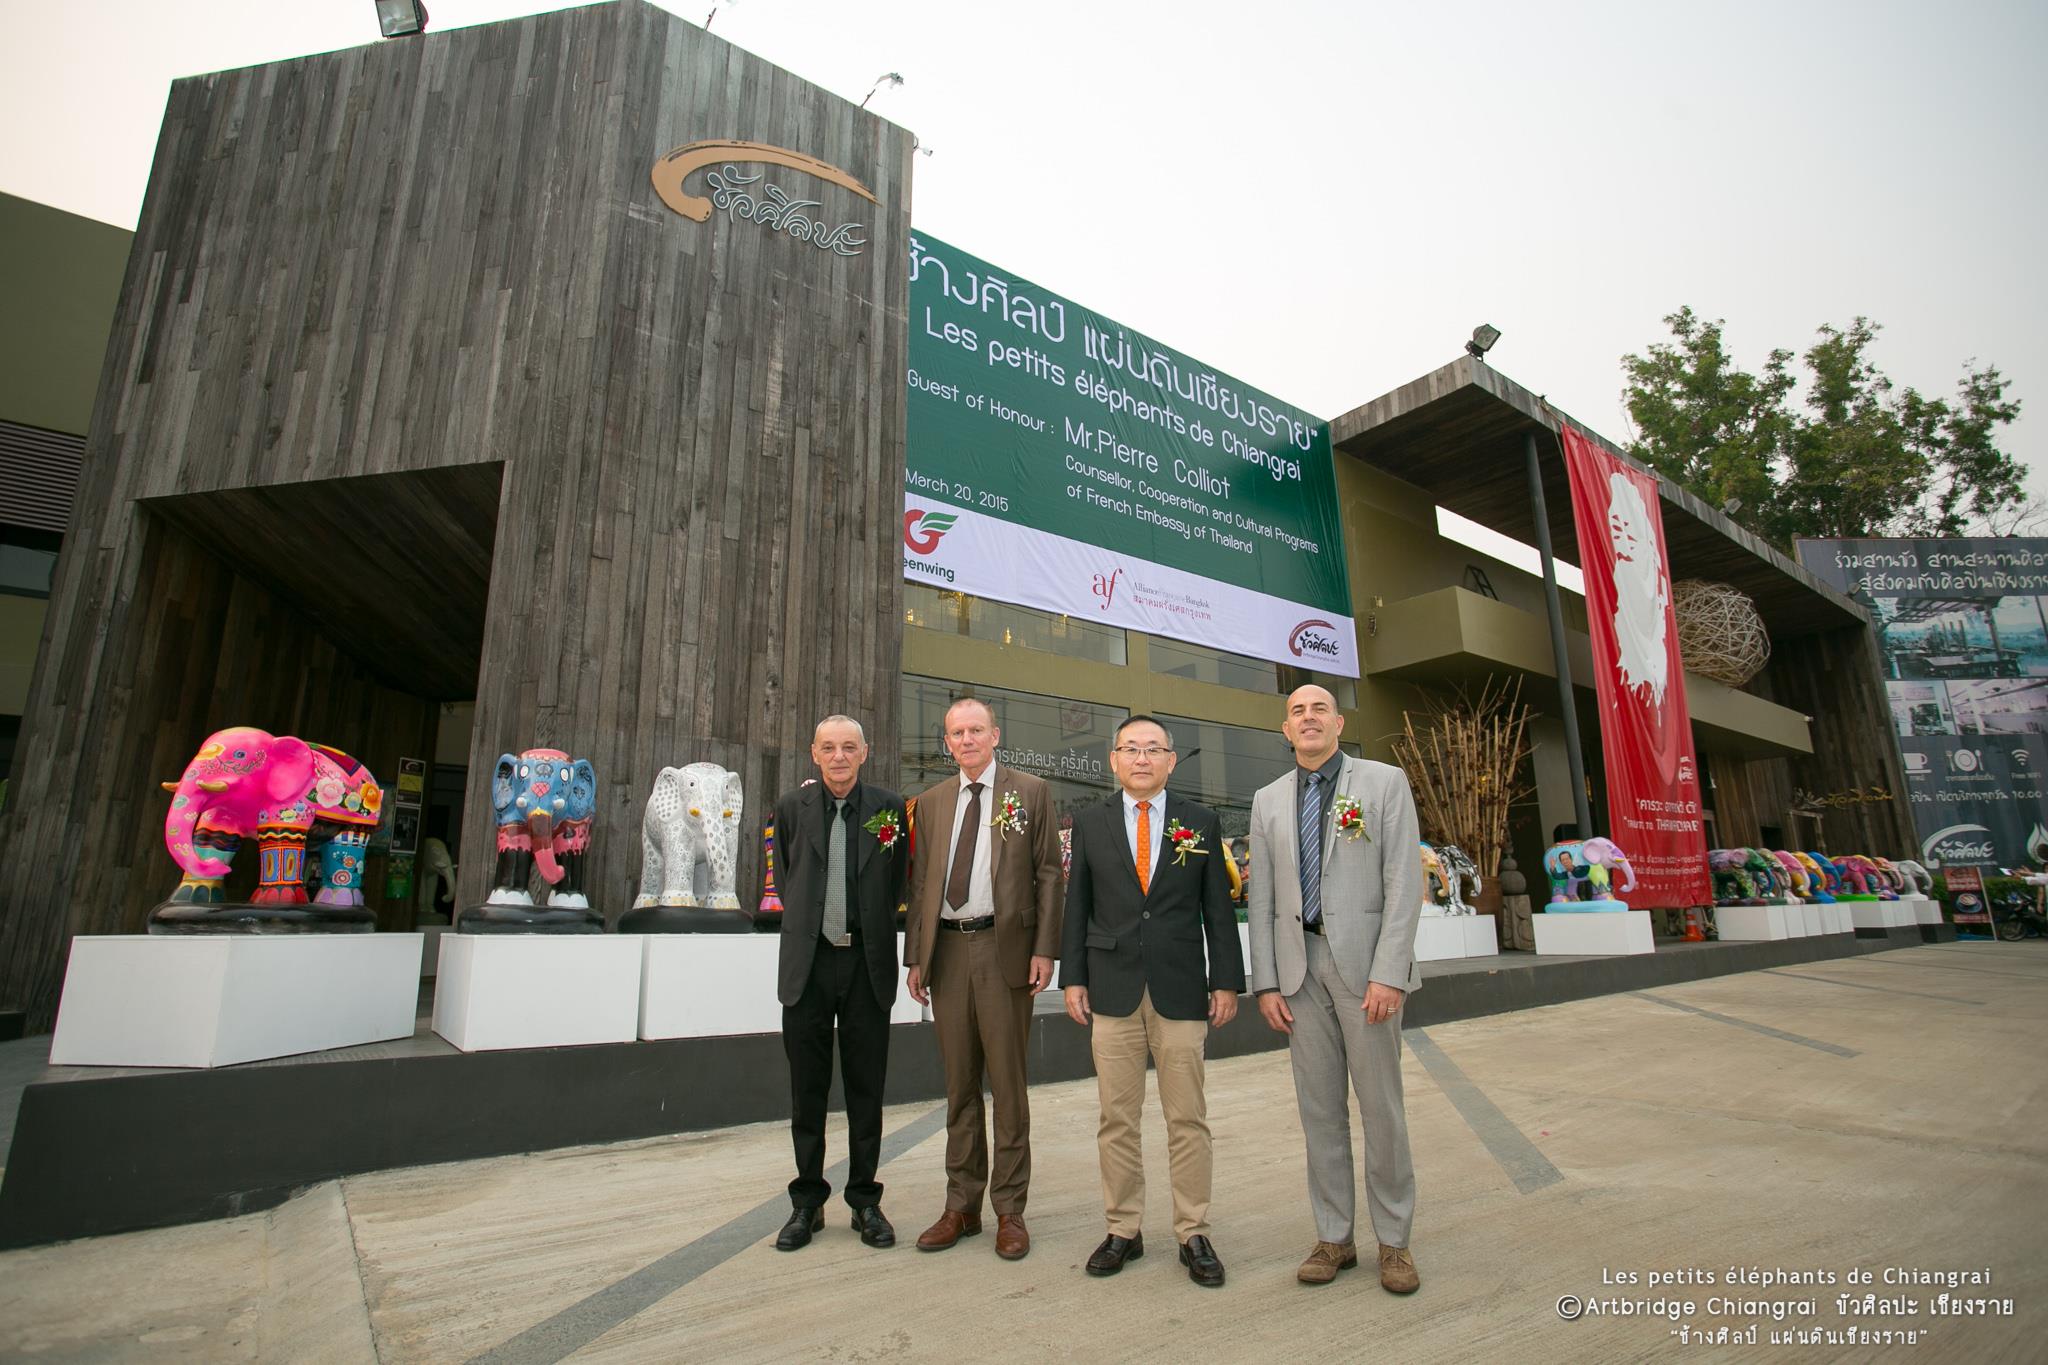 Opening ceremony and handover of the project "Les Petits Eléphants de Chiang Rai"